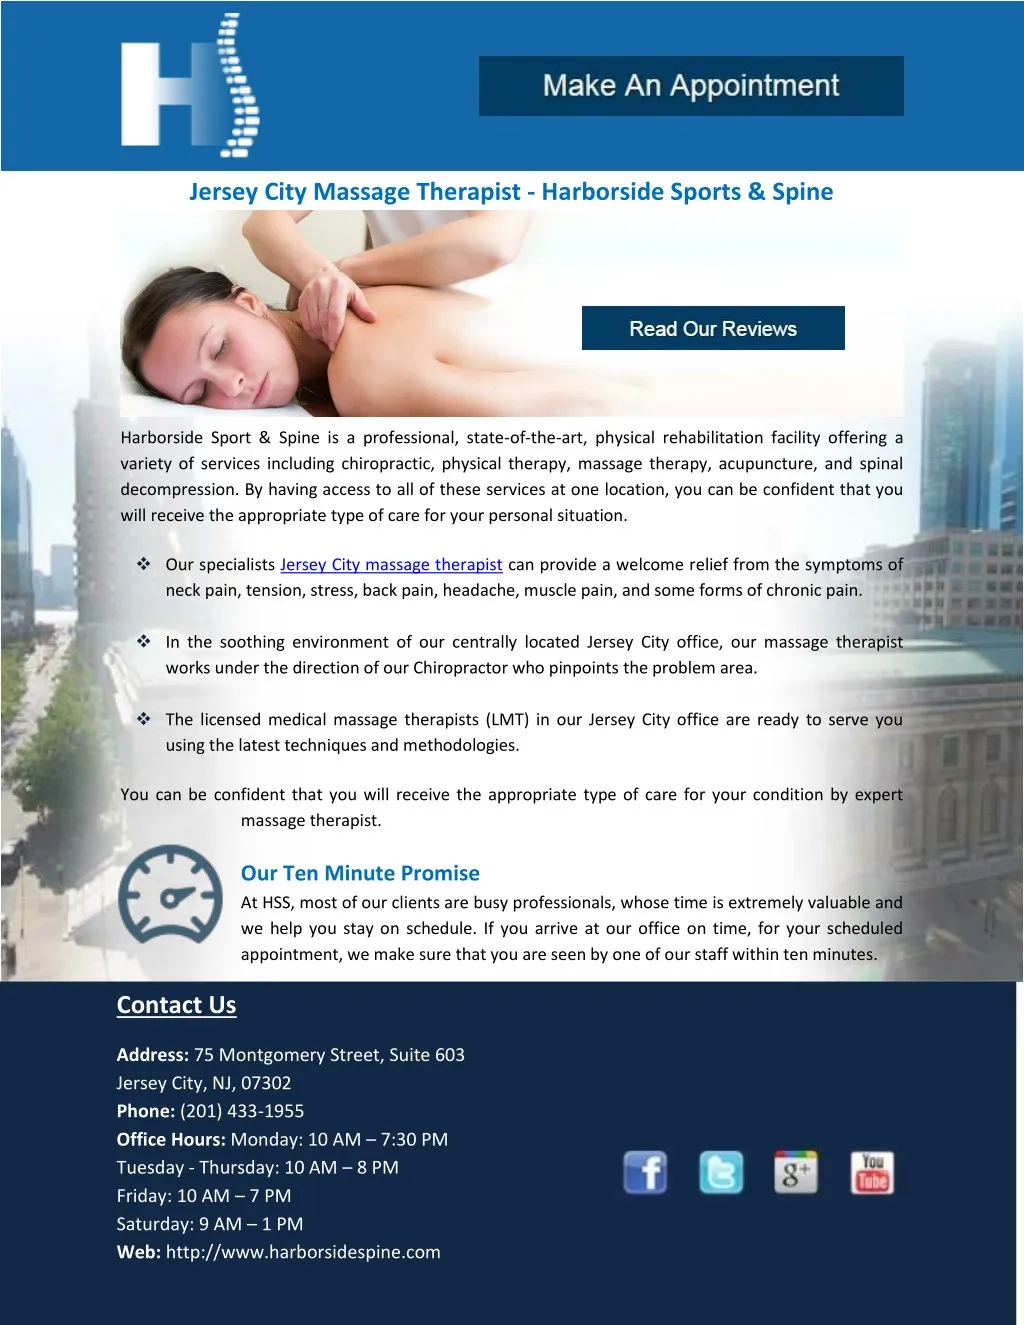 Ppt Jersey City Massage Therapist Harborside Sports And Spine Powerpoint Presentation Id7609567